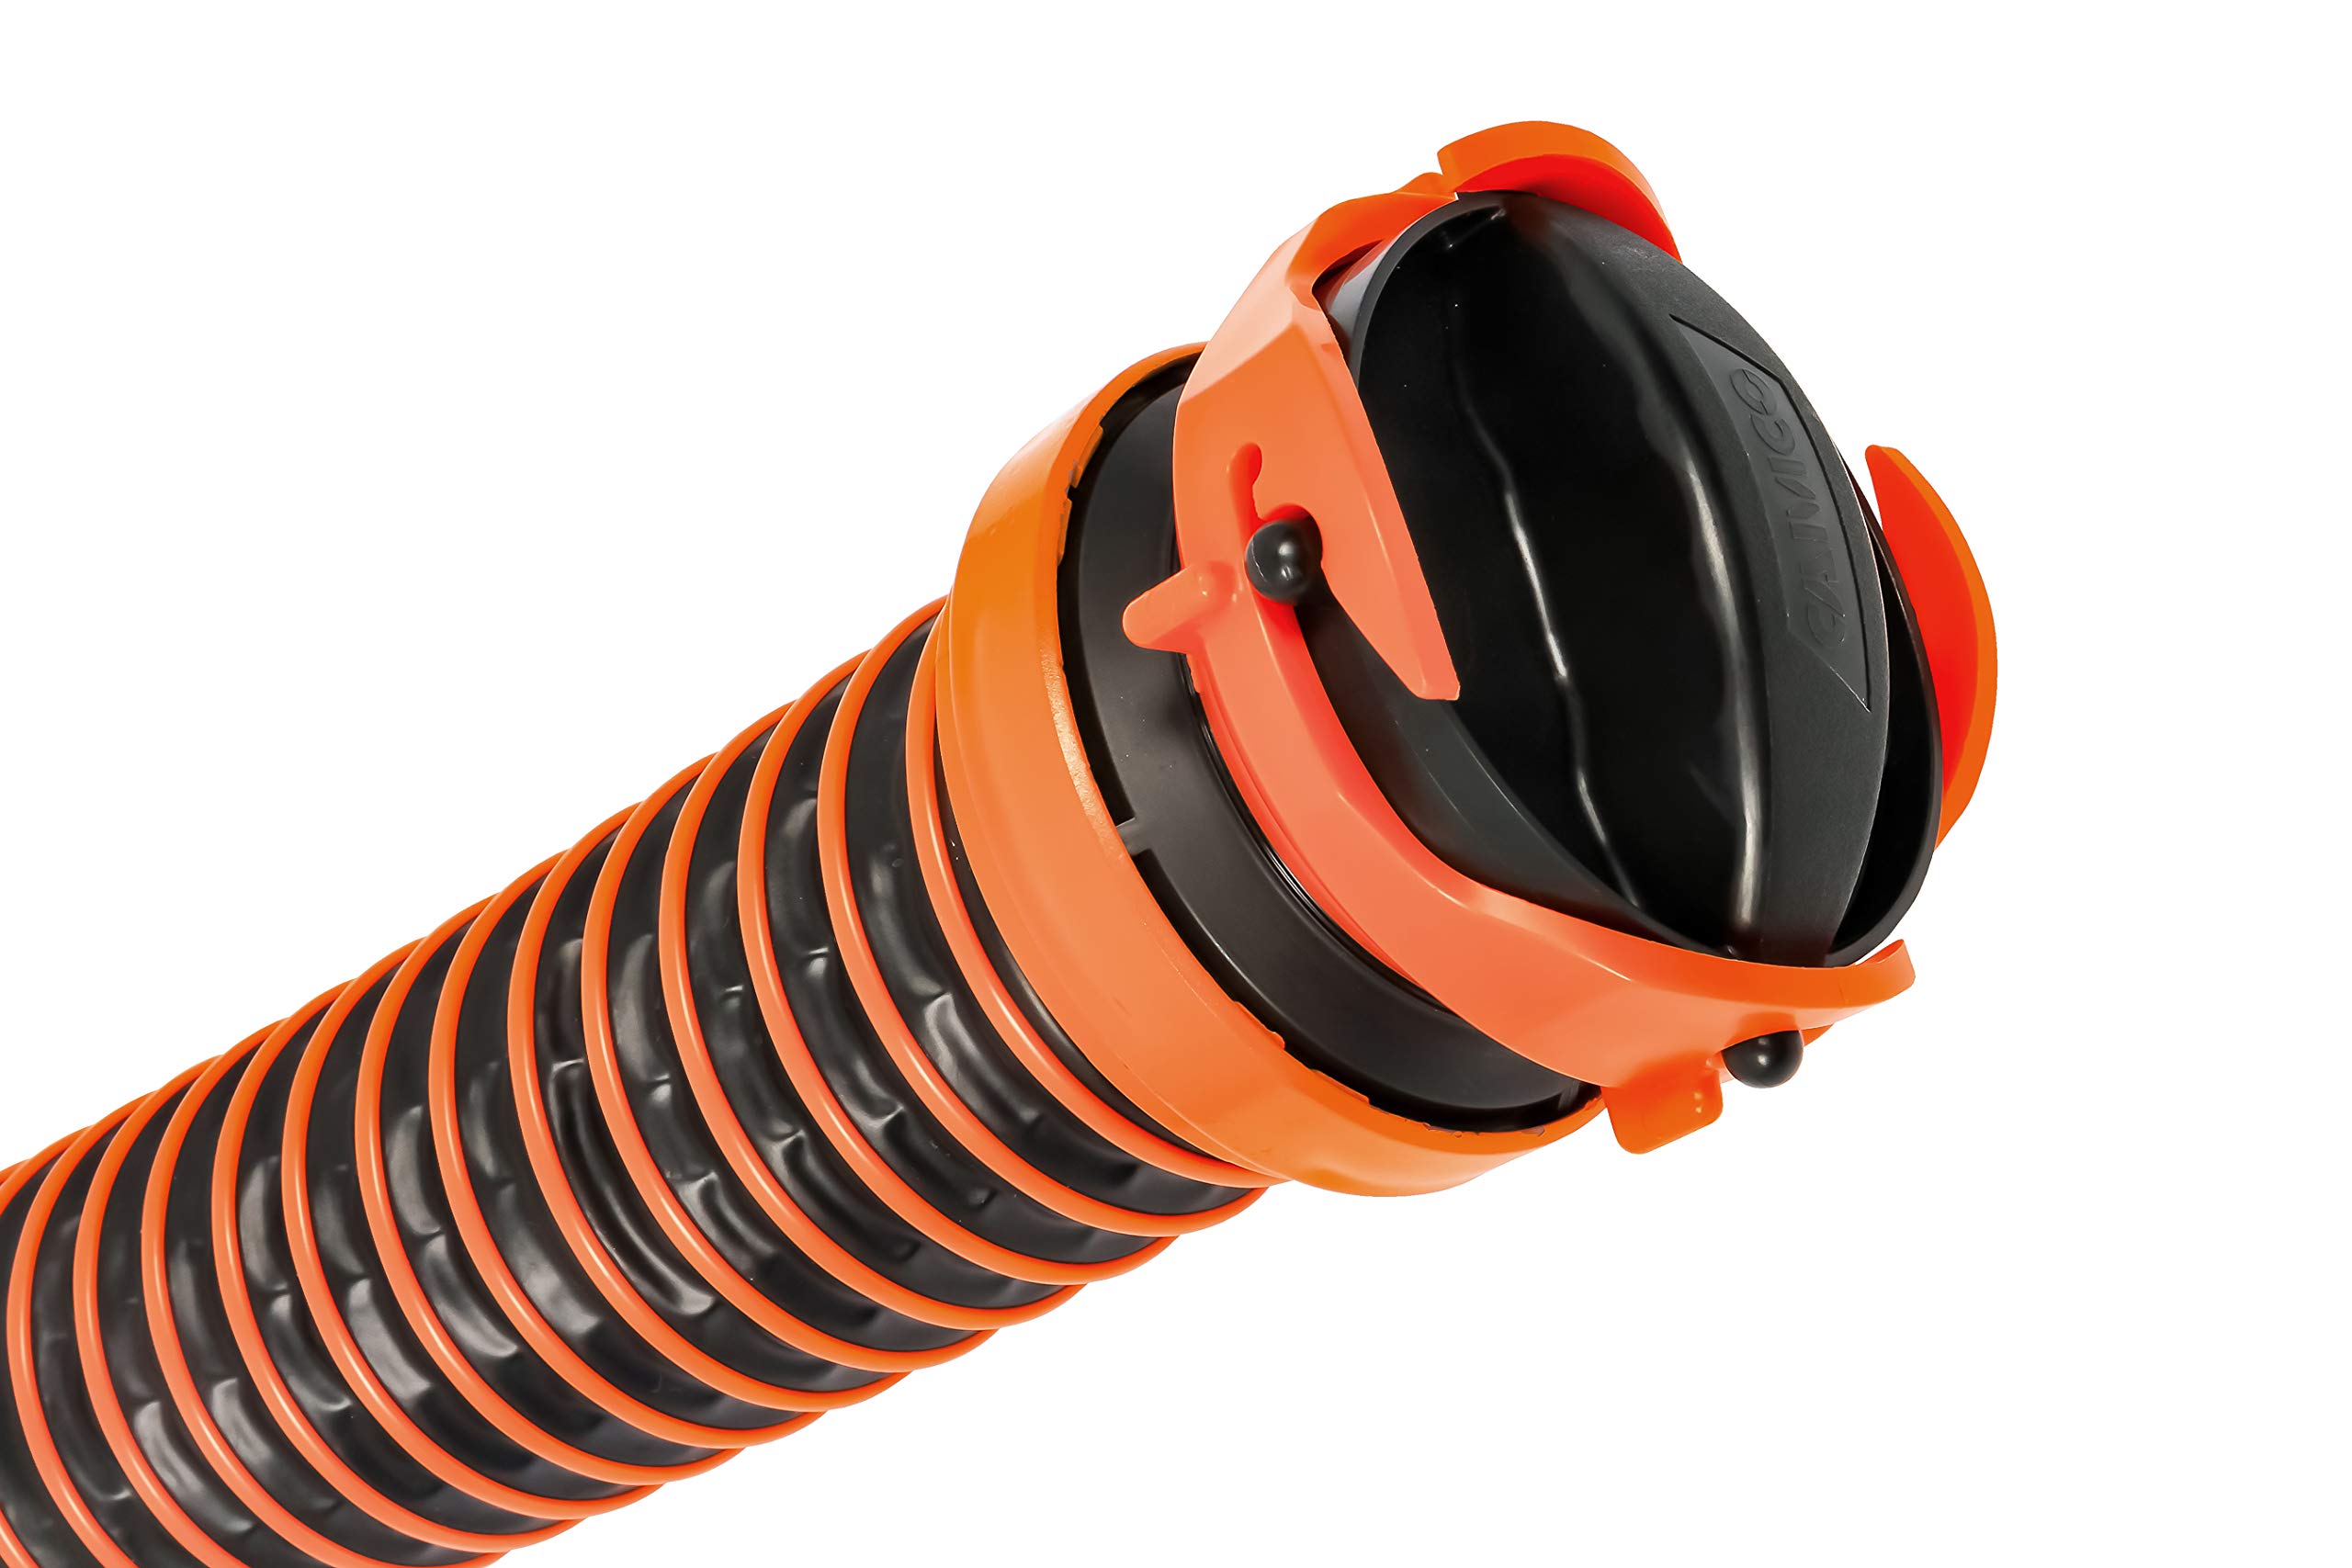 Camco RhinoEXTREME 20-Ft Camper/RV Sewer Hose Kit | Features TPE Tech for Crush and Abrasion Resistance, a 360-Degree Clear Swivel Wye Fitting, and a Removable 4-in-1 Adapter for Easy Storage (21056)